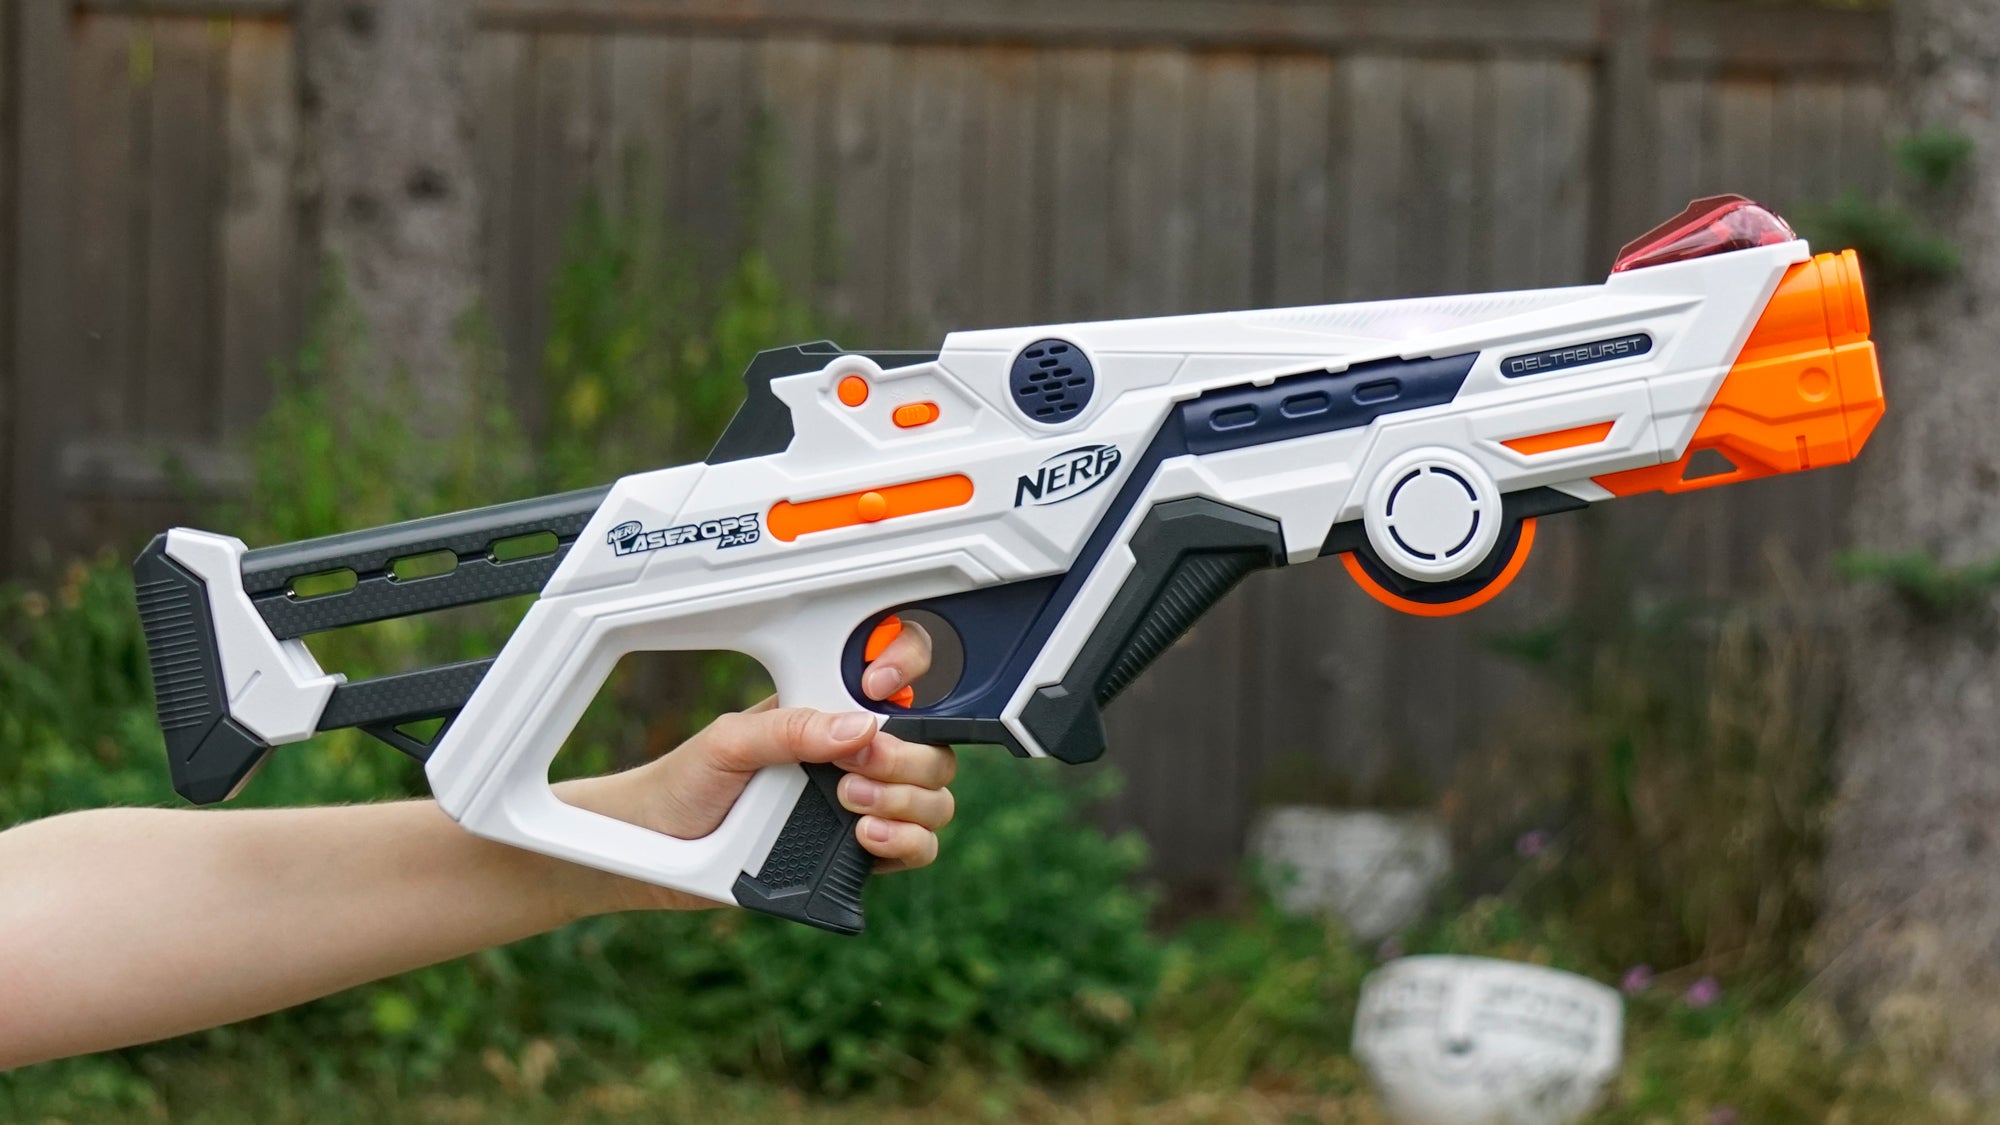 Nerf Laser Ops Pro Review Laser Tag Ar And Nerf Gloriously Combined Aivanet